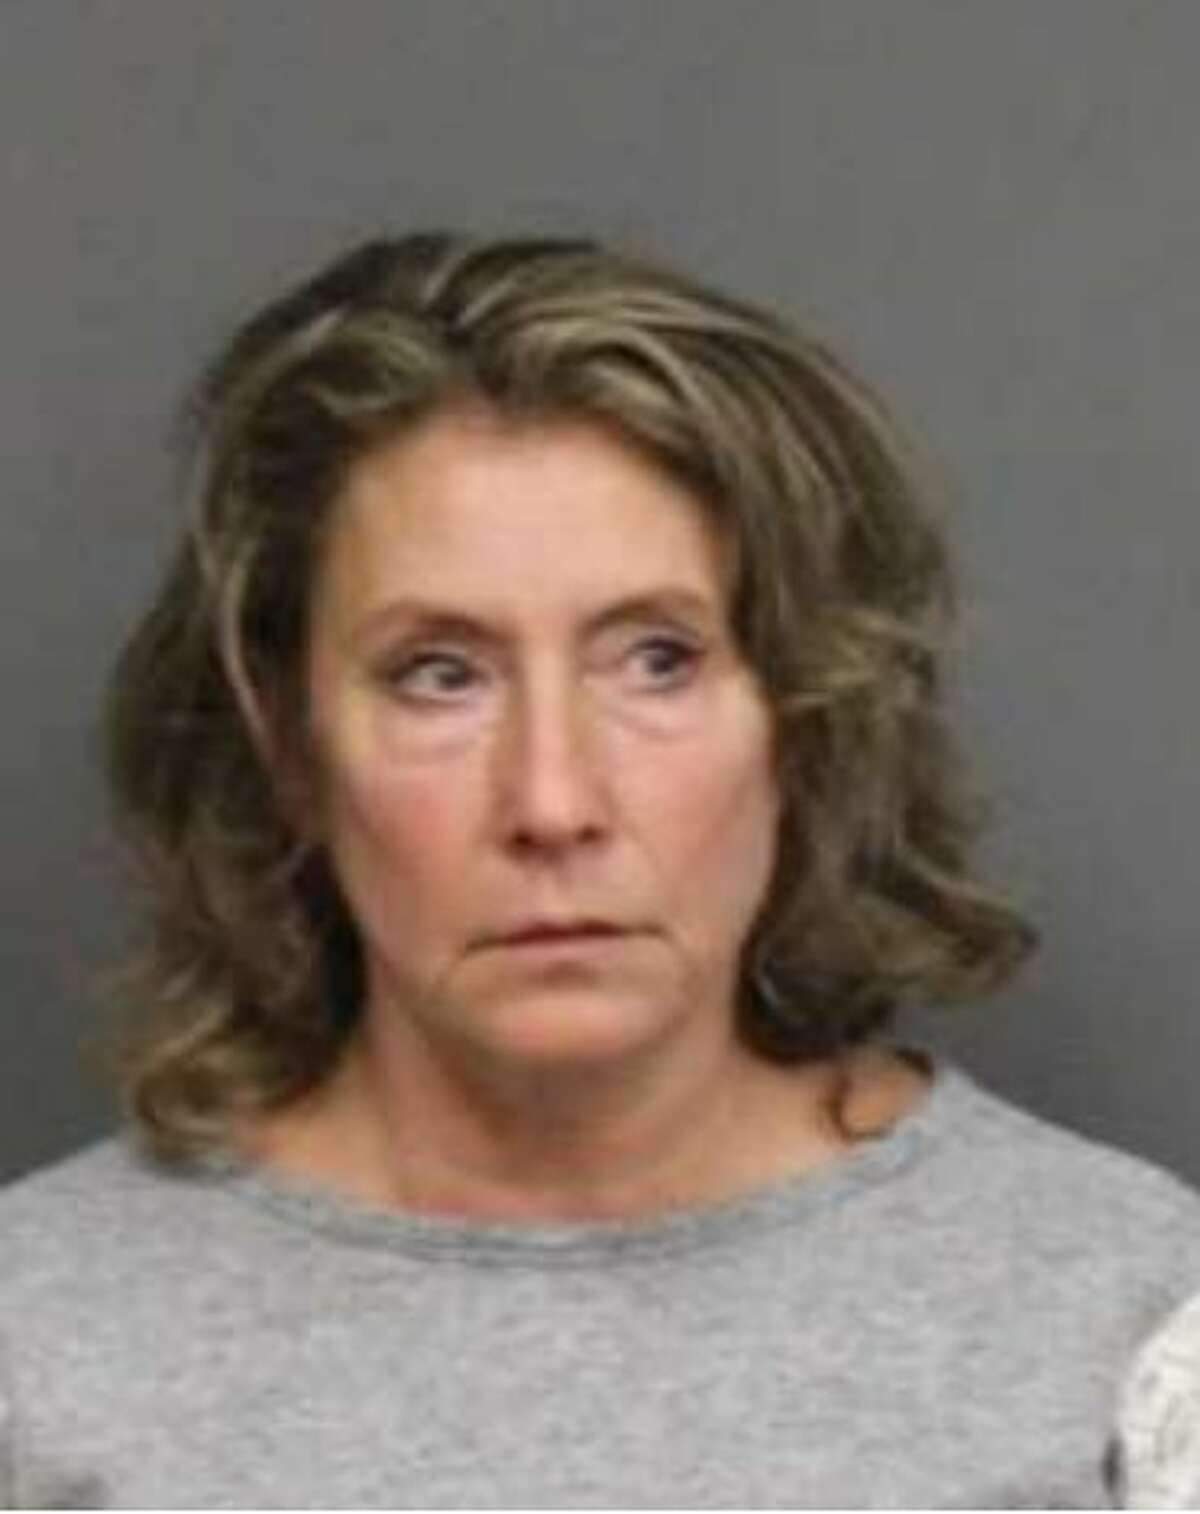 Jacqueline Jewett, 57, of Westbrook, is wanted for allegedly committing second-degree burglary and first-degree grand larceny in New York State, according to the Connecticut State Police.